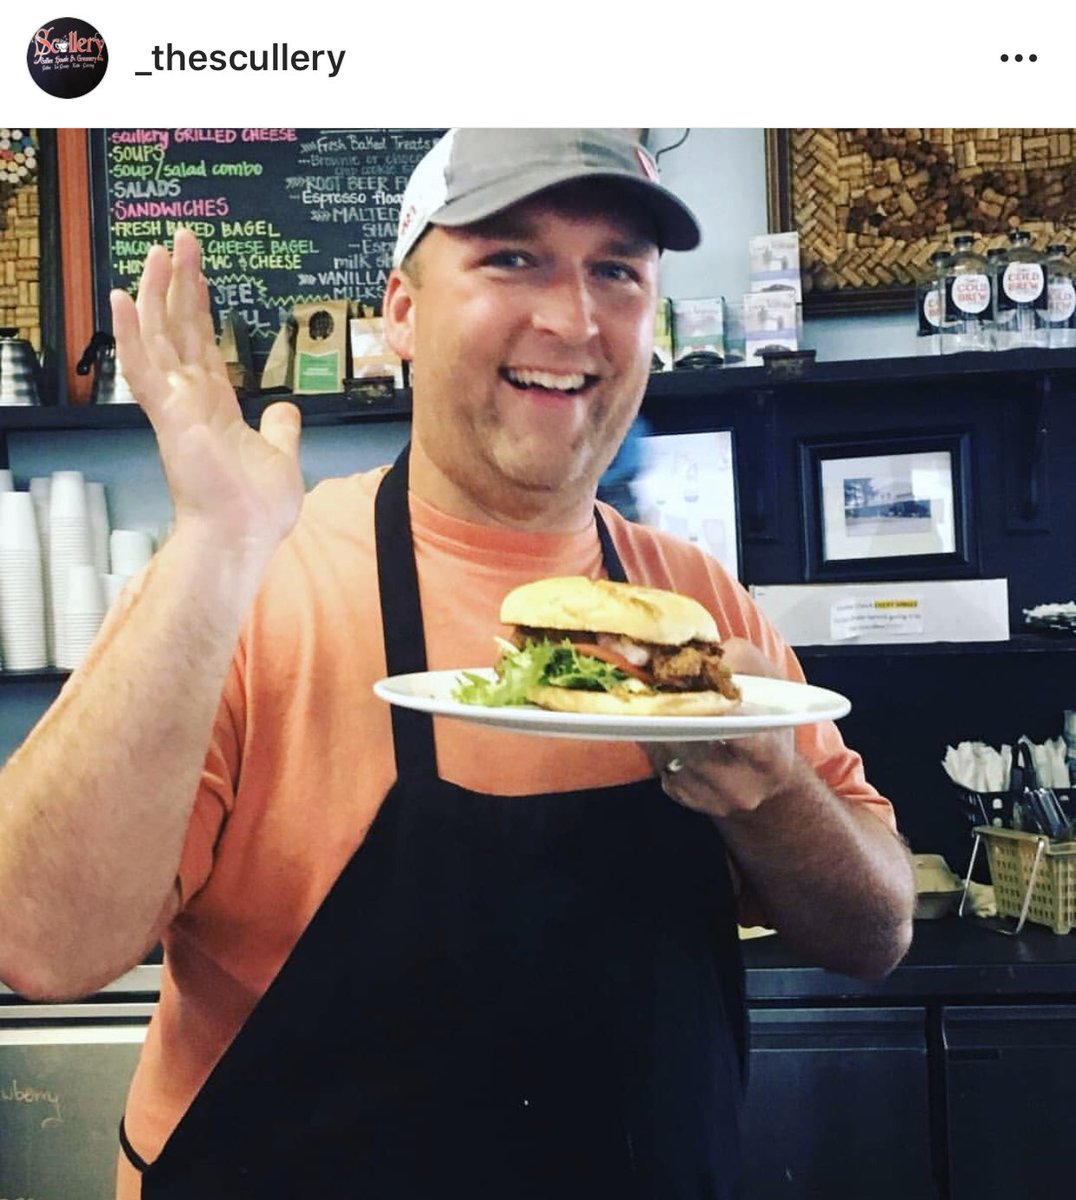 Like many, many restaurants, “The Scullery” in Greenville, NC is closed. My younger cousin Matt and his wife Erin pour their hearts and lives into this place. Their food wins awards, they give back to their community, they employ 2-dozen people, and invite everyone...  #thread